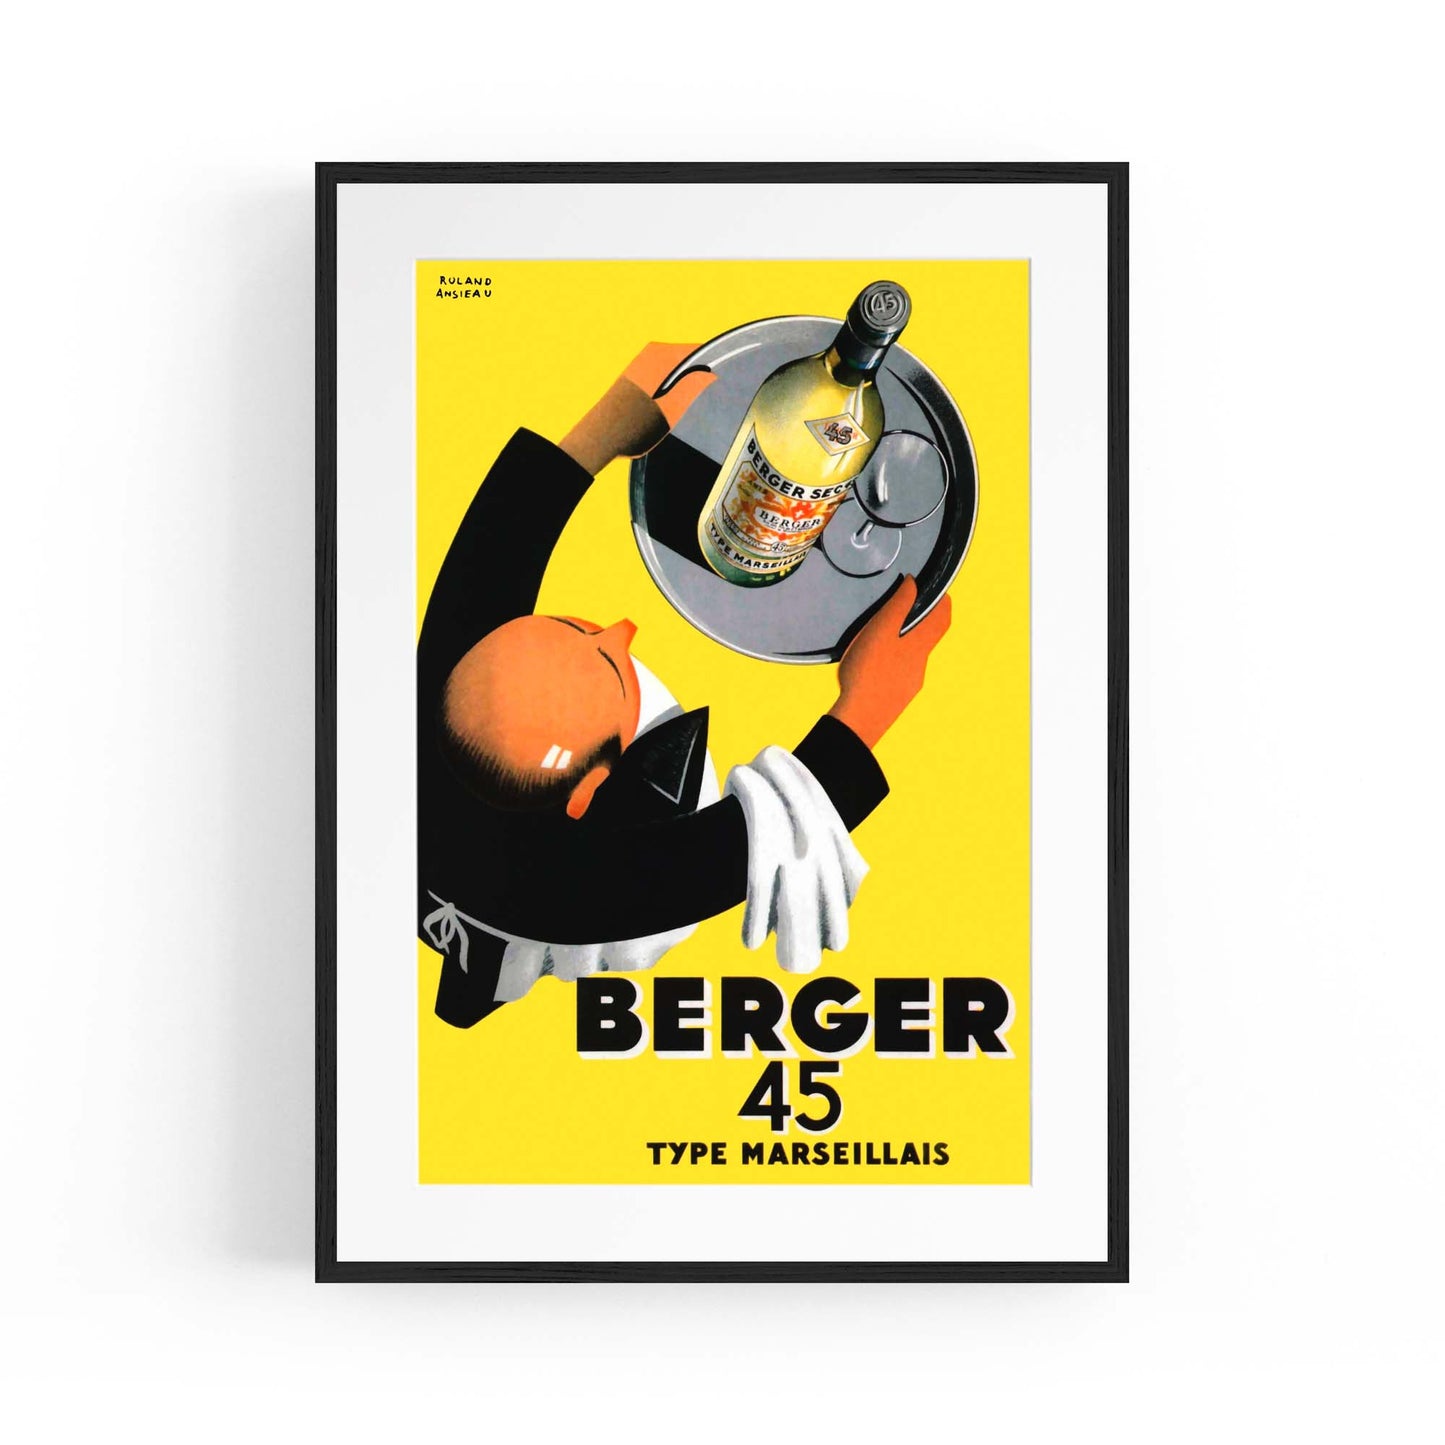 Berger 45 Vintage Advert Wall Art - The Affordable Art Company